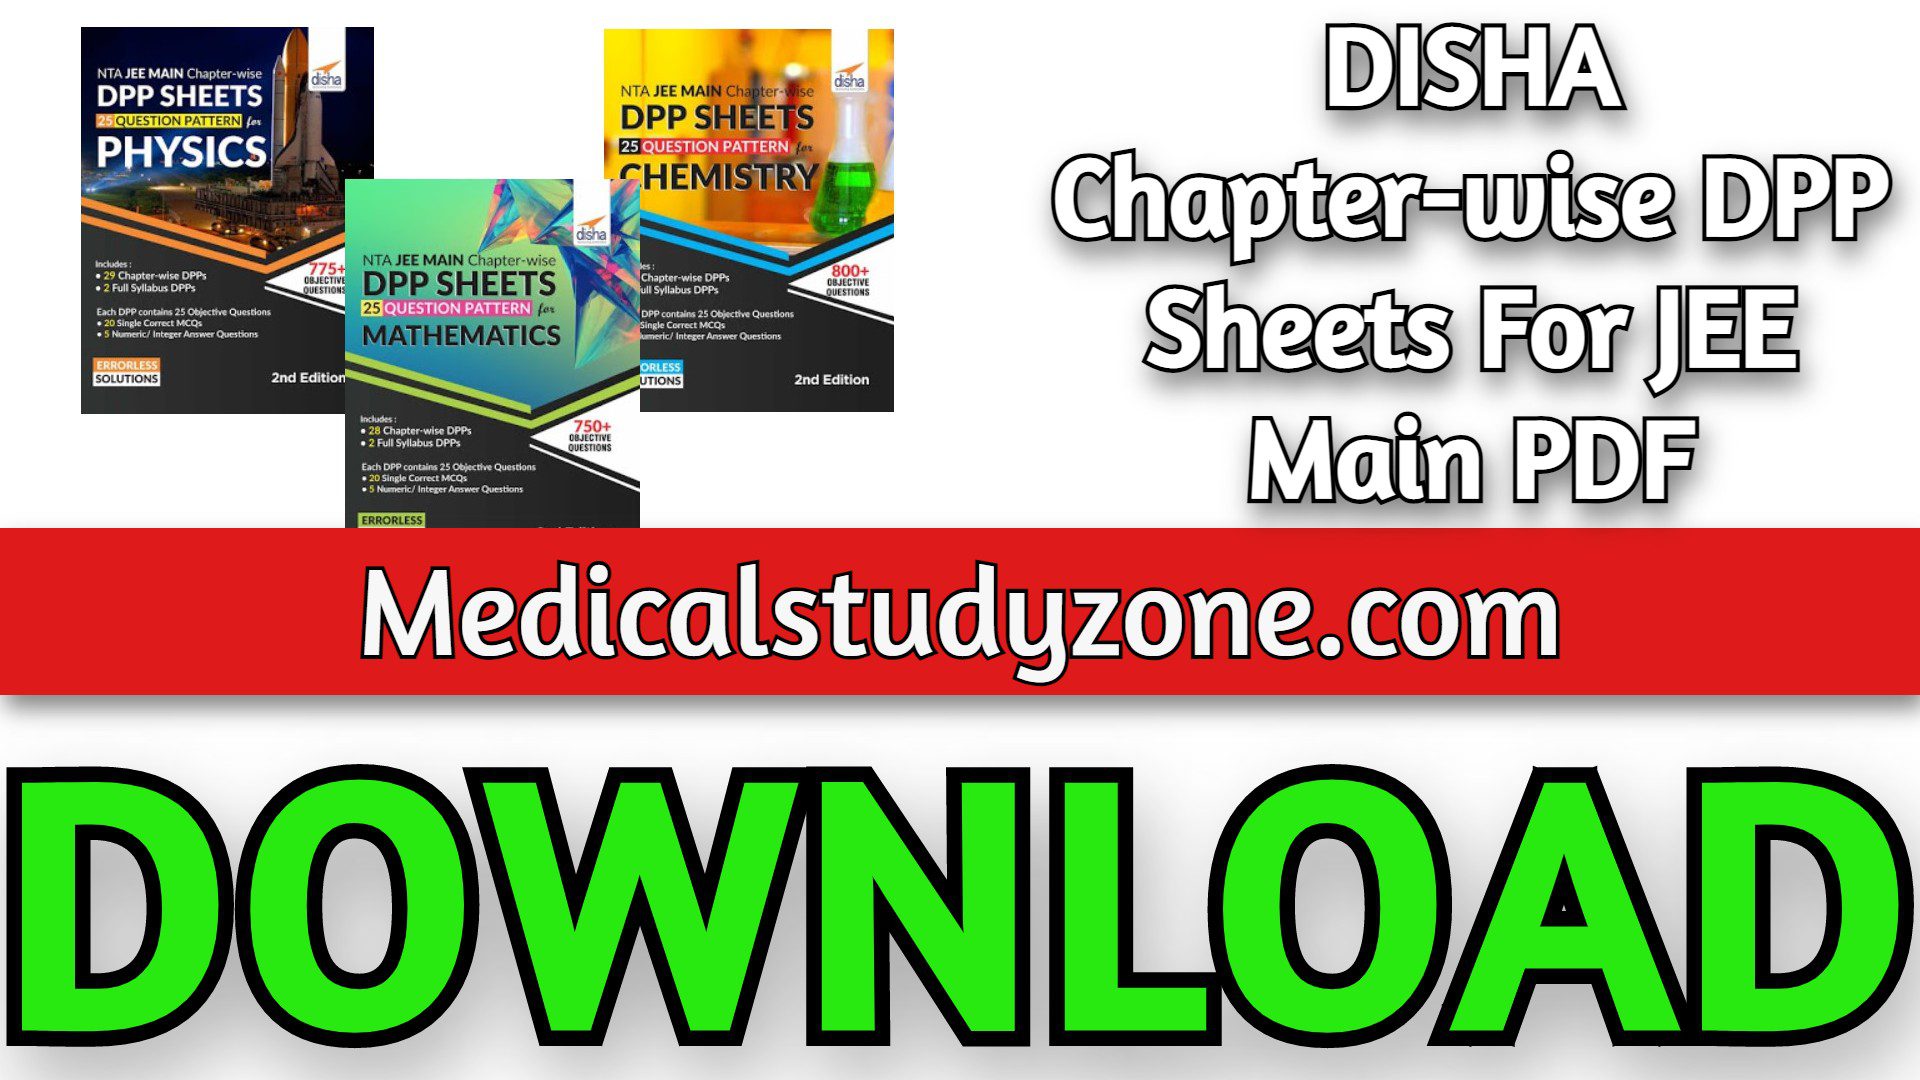 DISHA Chapter-wise DPP Sheets For JEE Main PDF Free Download